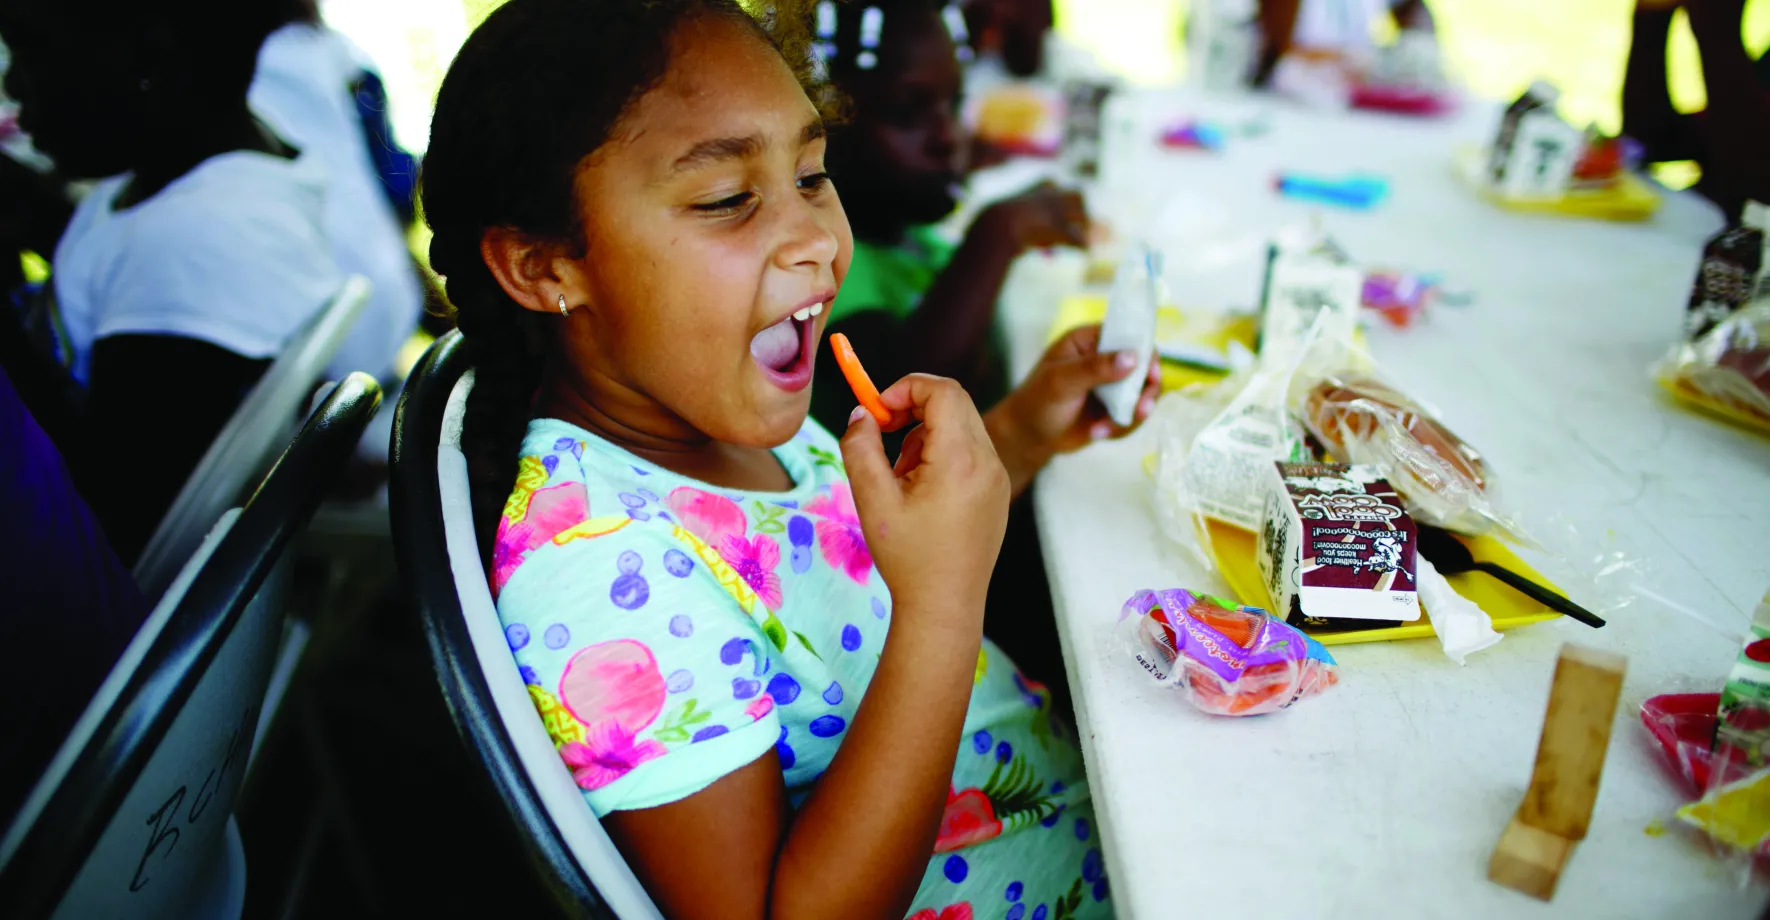 Kids across America can get free meals in the summer